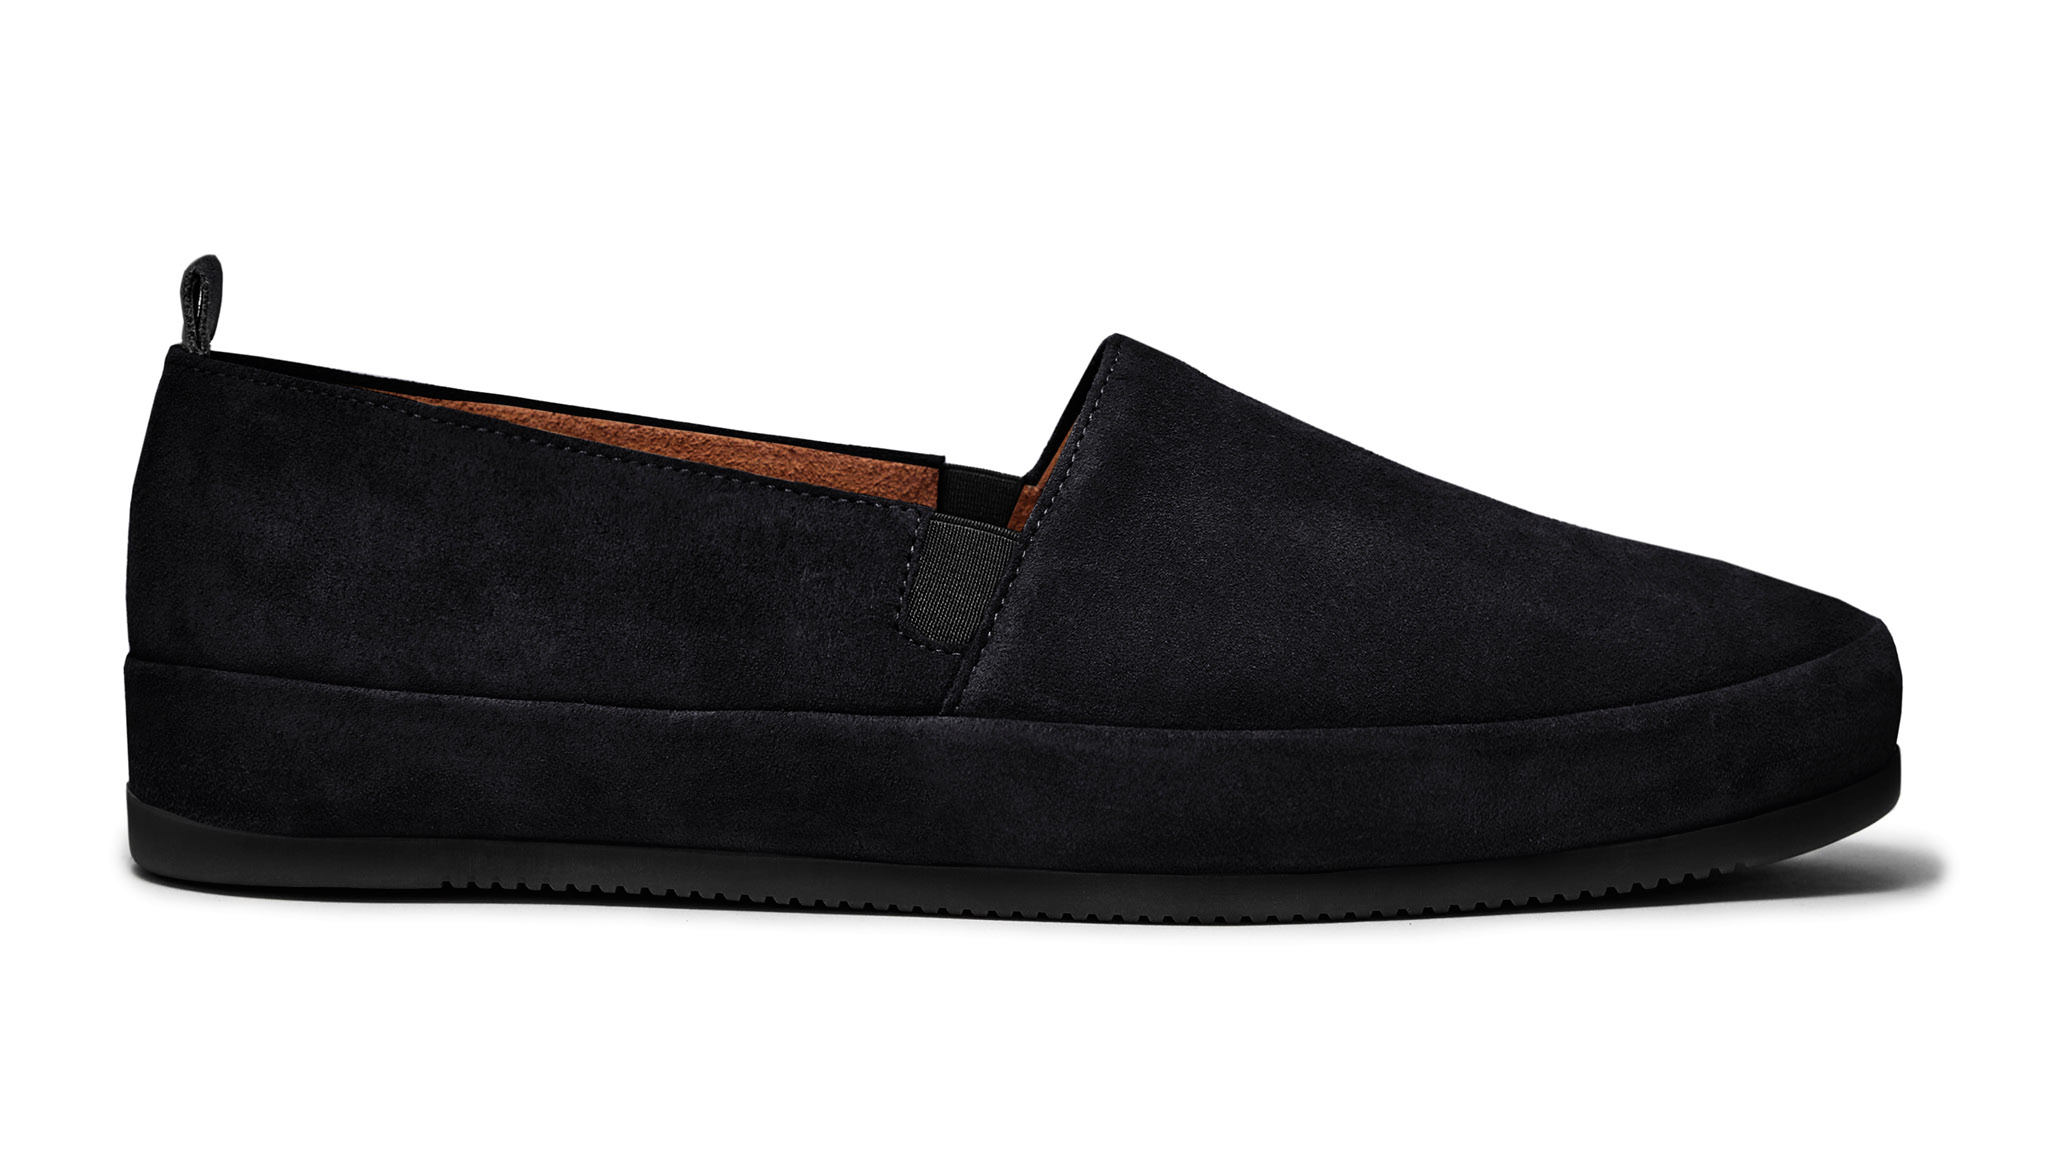 suede leather loafer shoes